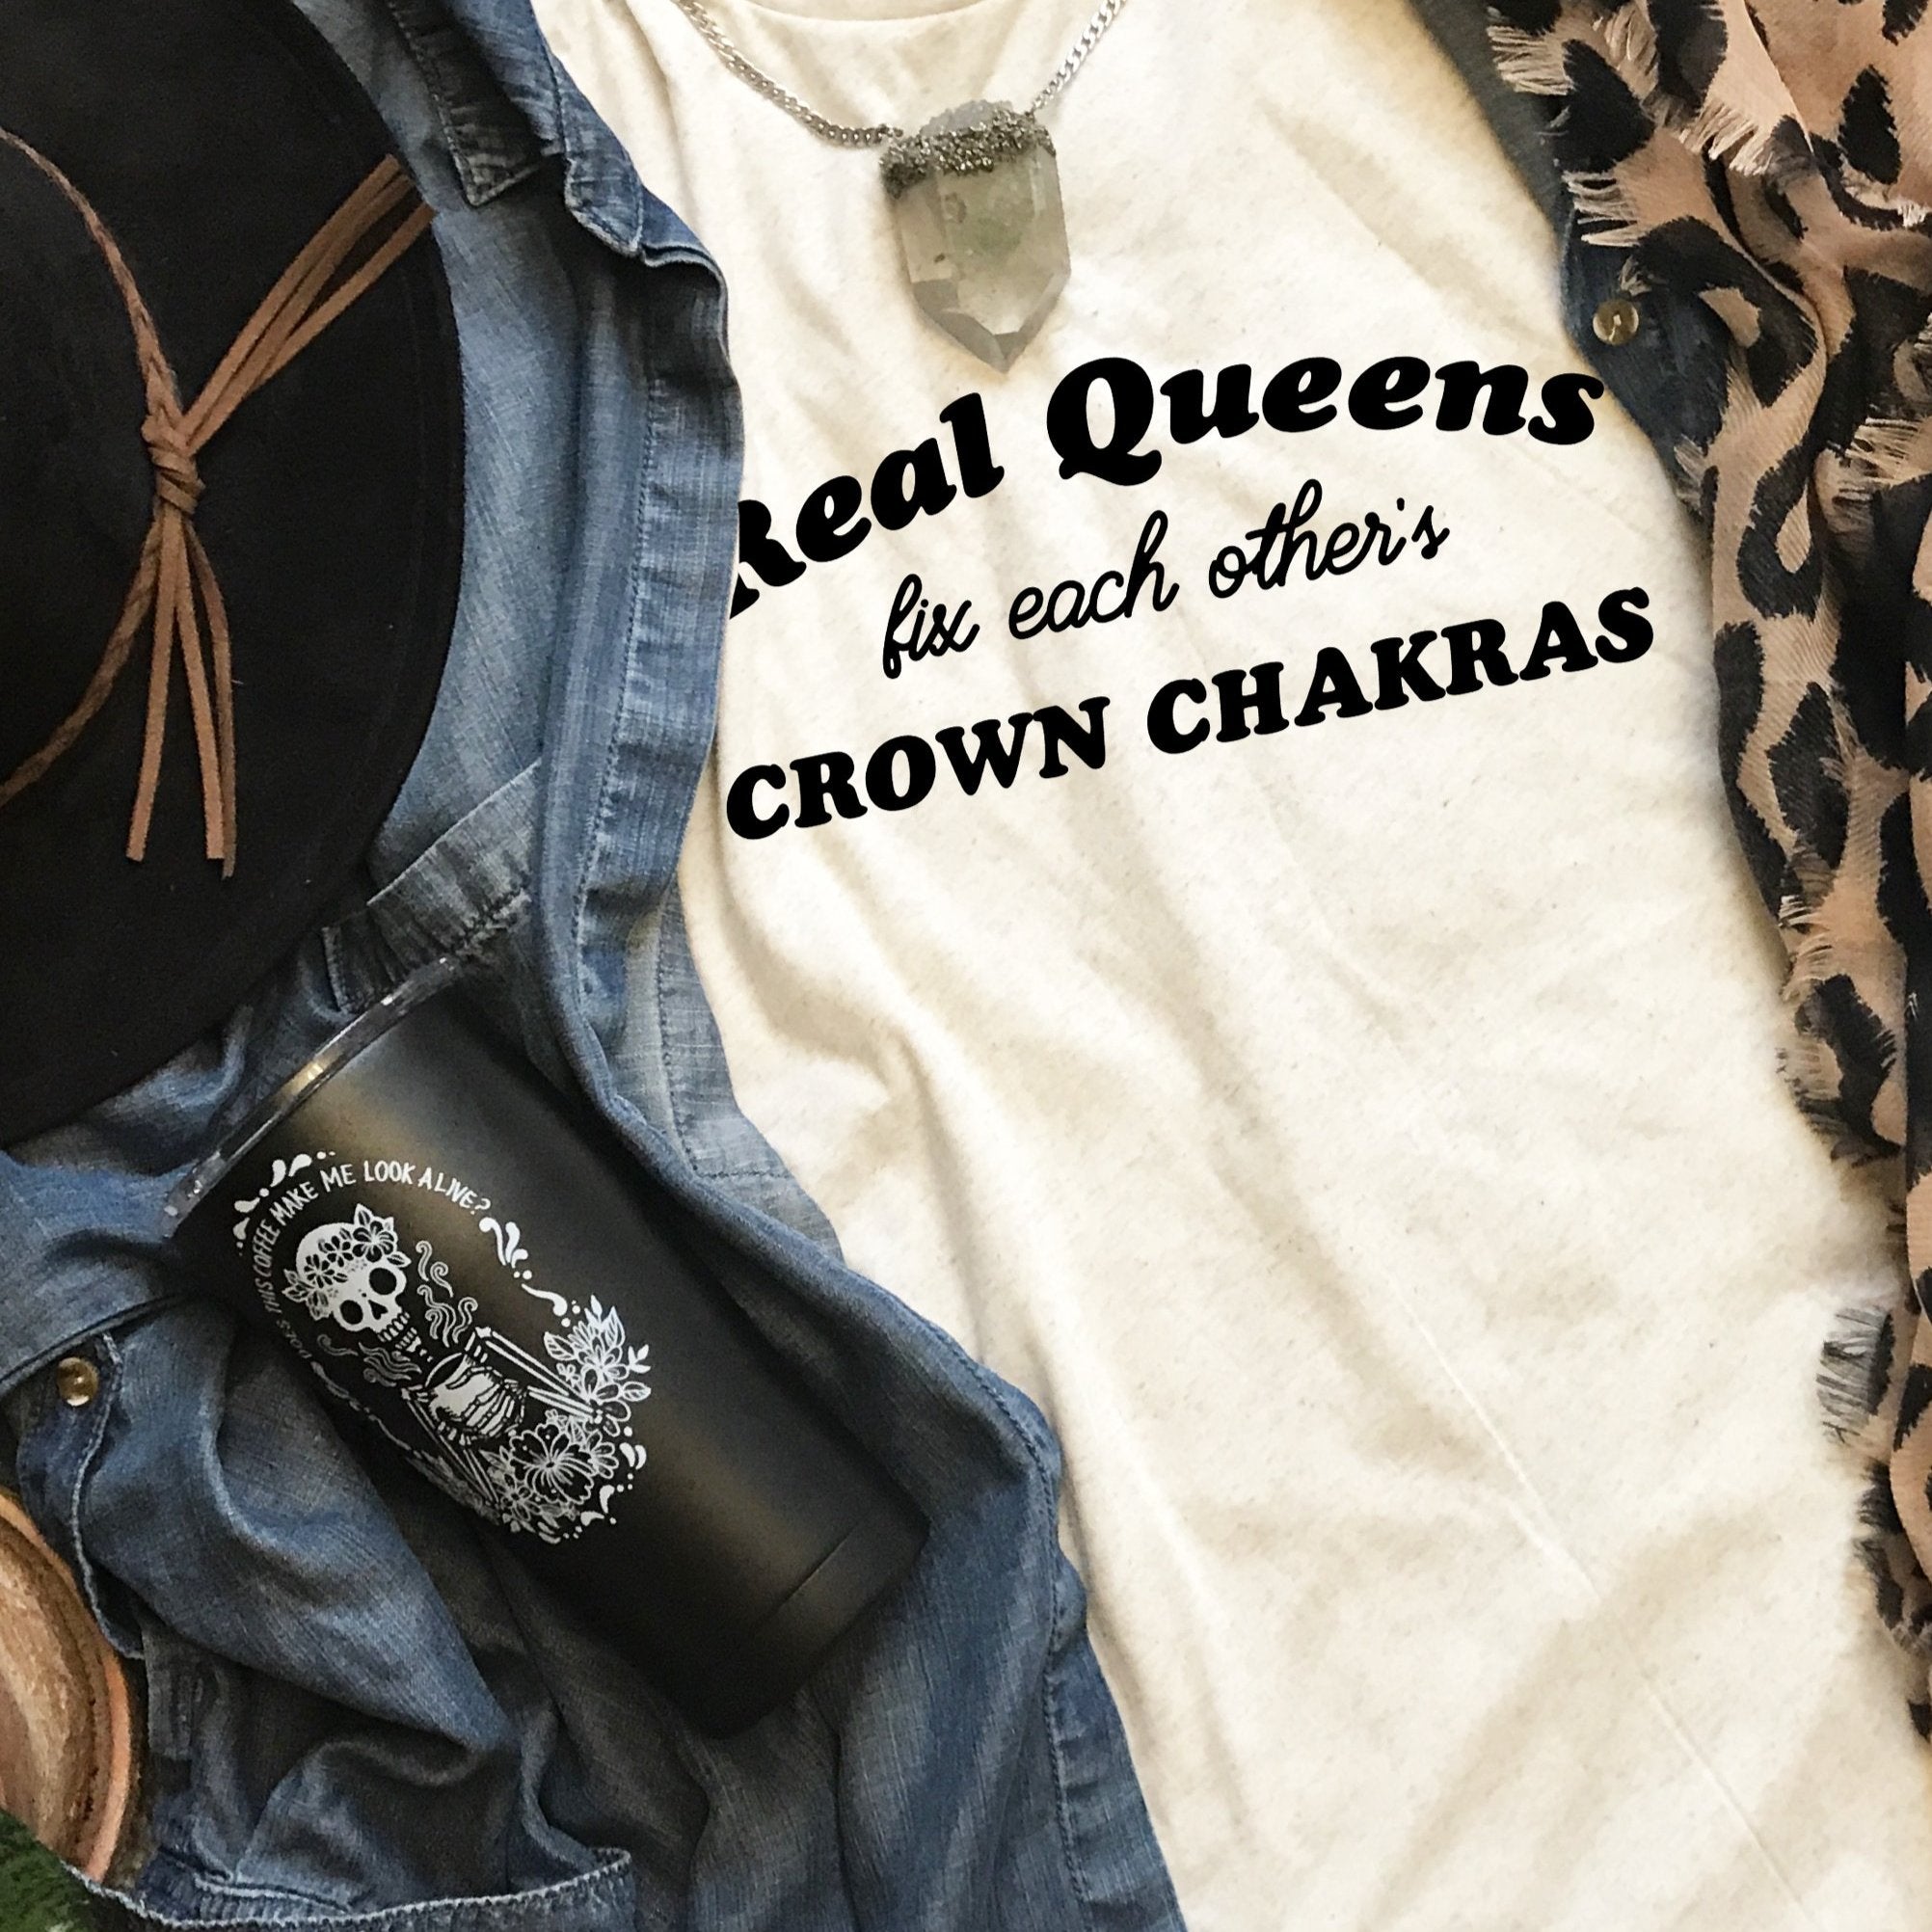 « REAL QUEENS FIX EACH OTHER'S CROWN CHAKRAS » CREAM UNISEX TEE